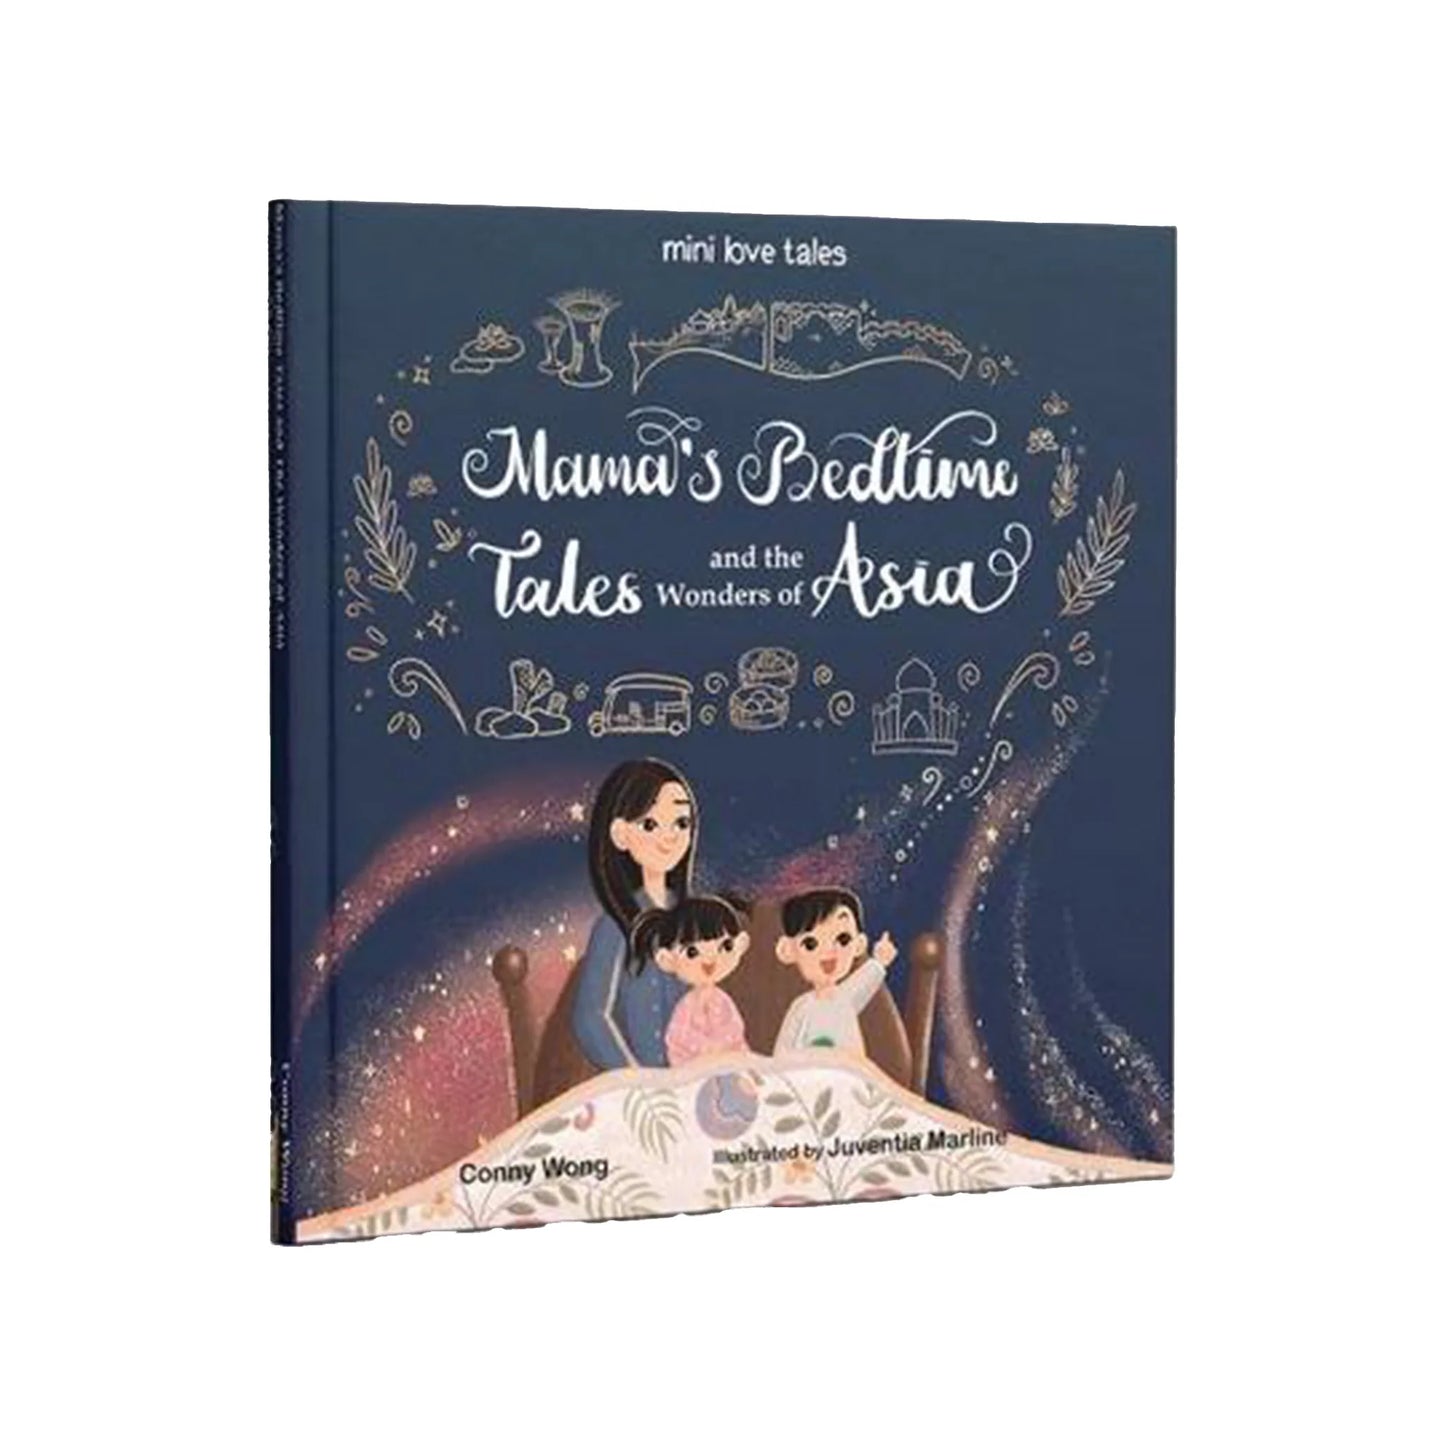 Mama's Bedtime Tales and the Wonders of Asia - Hardcover Picture Book